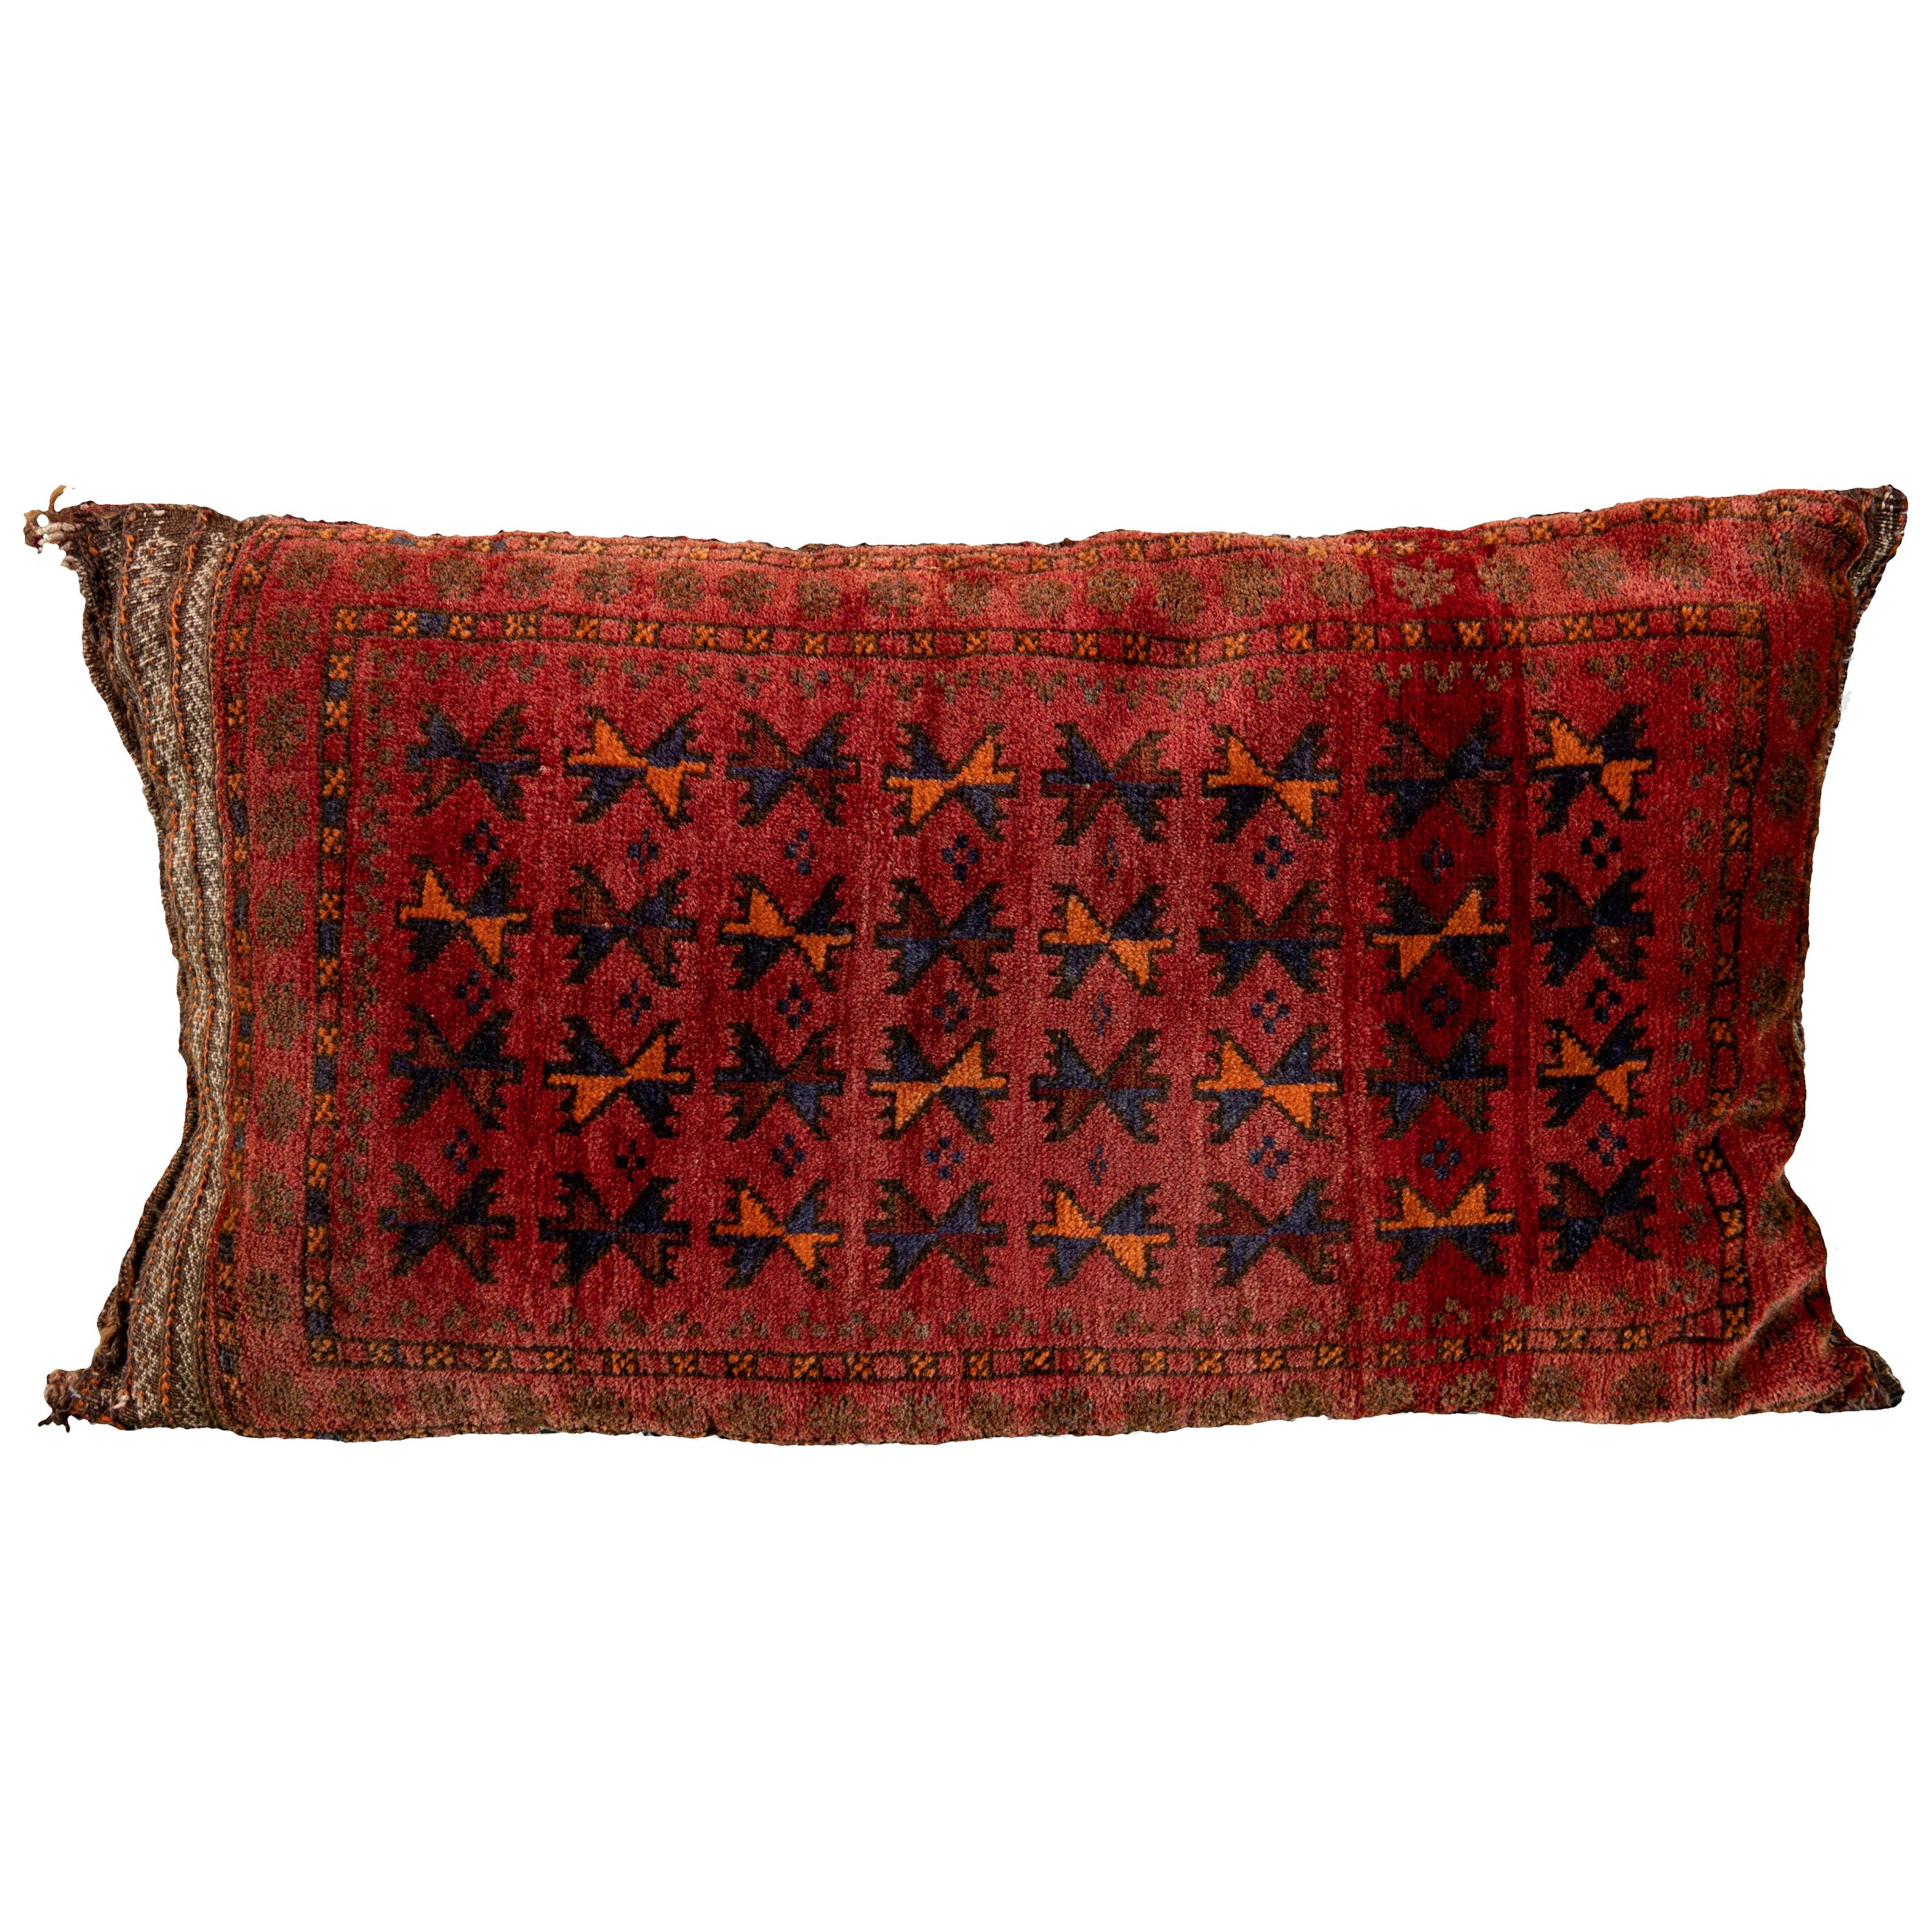 Large Red Vintage Persian Tribal Pillow